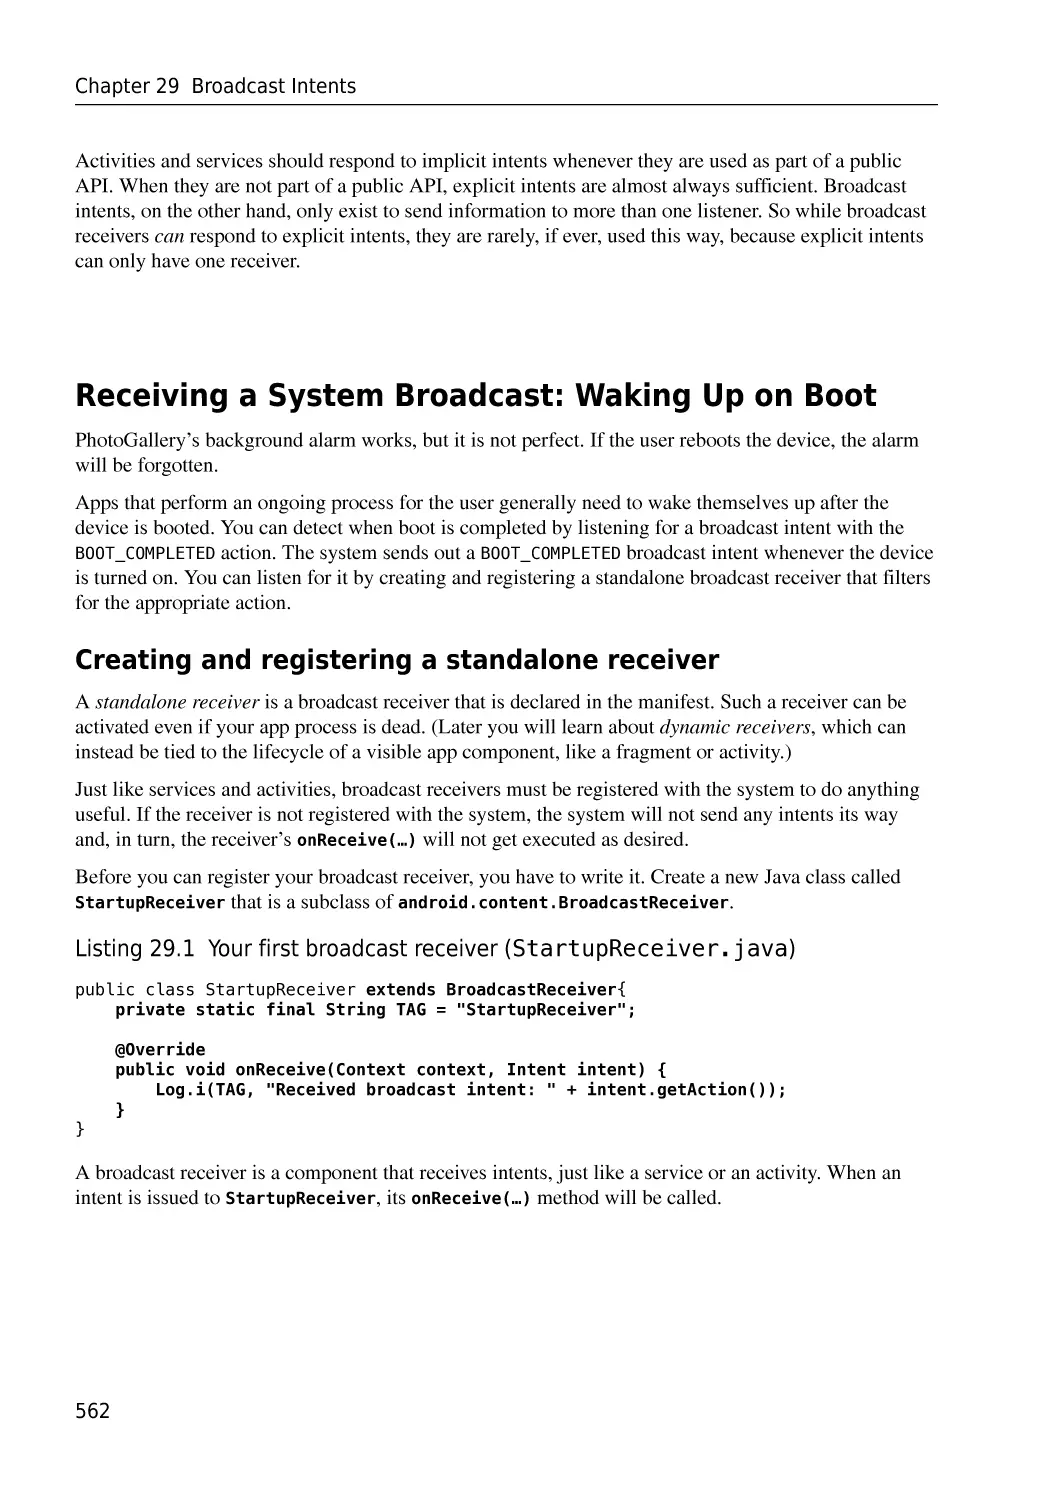 Receiving a System Broadcast
Creating and registering a standalone receiver